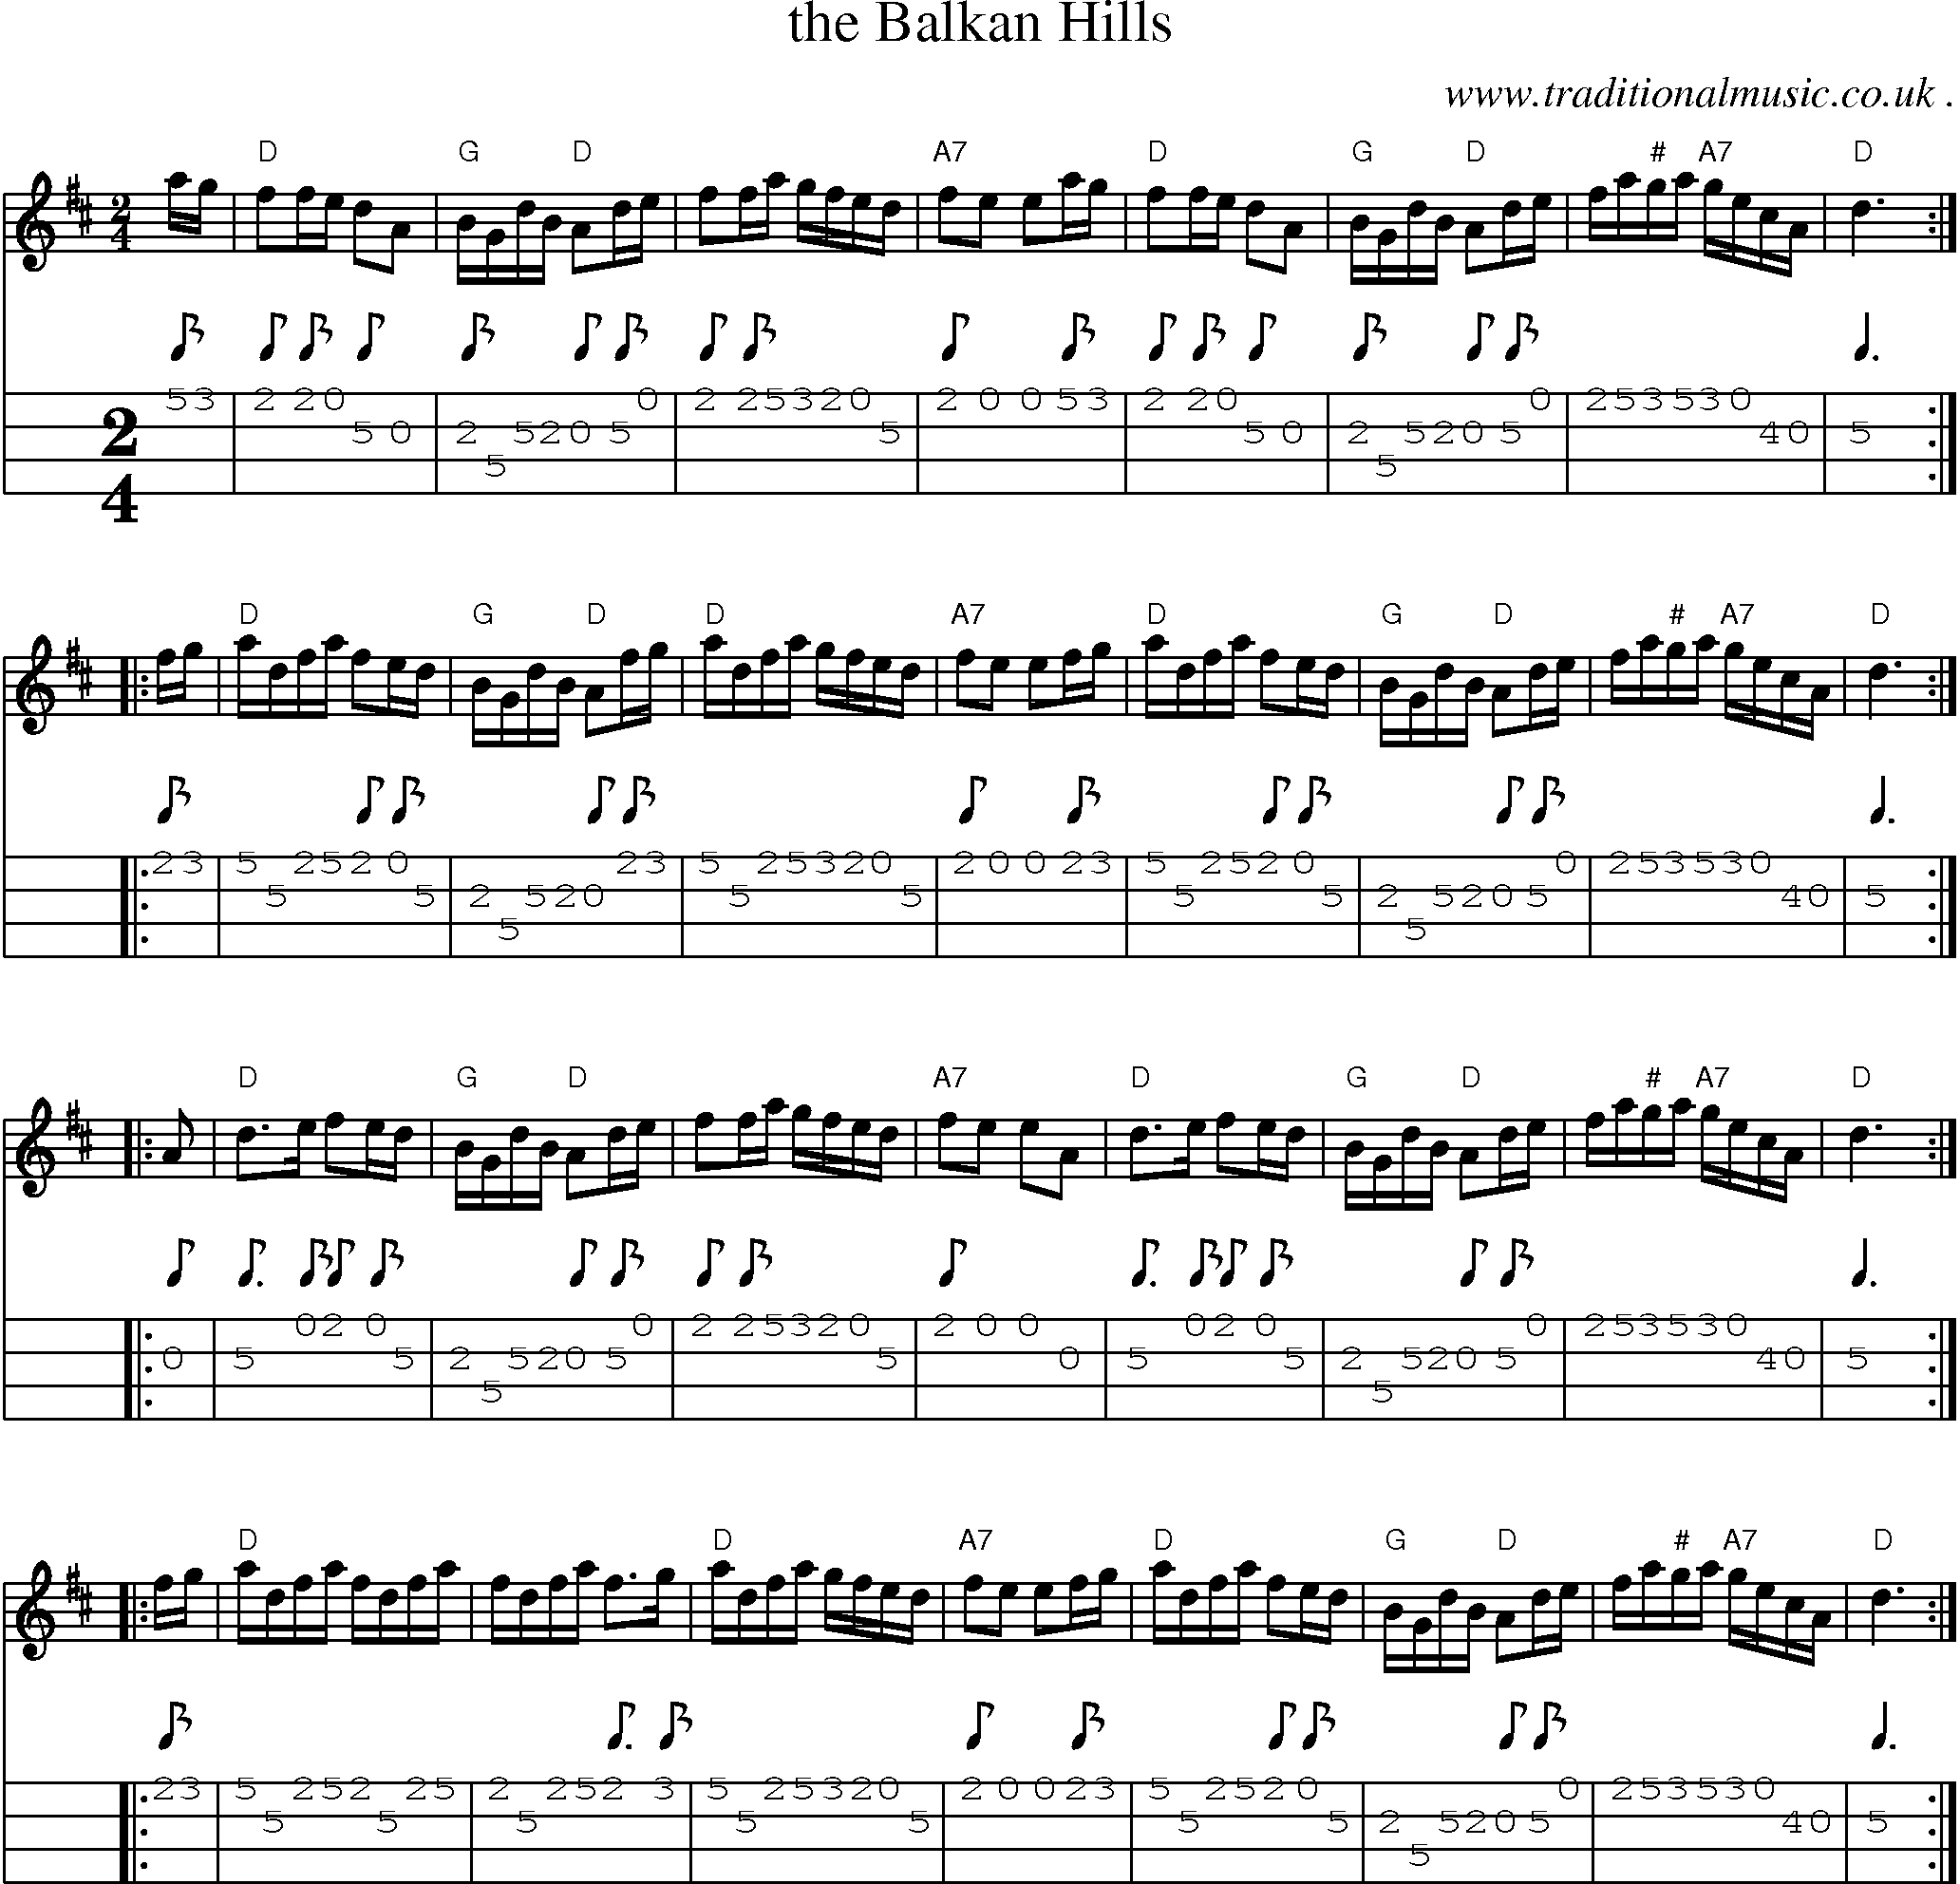 Sheet-music  score, Chords and Mandolin Tabs for The Balkan Hills